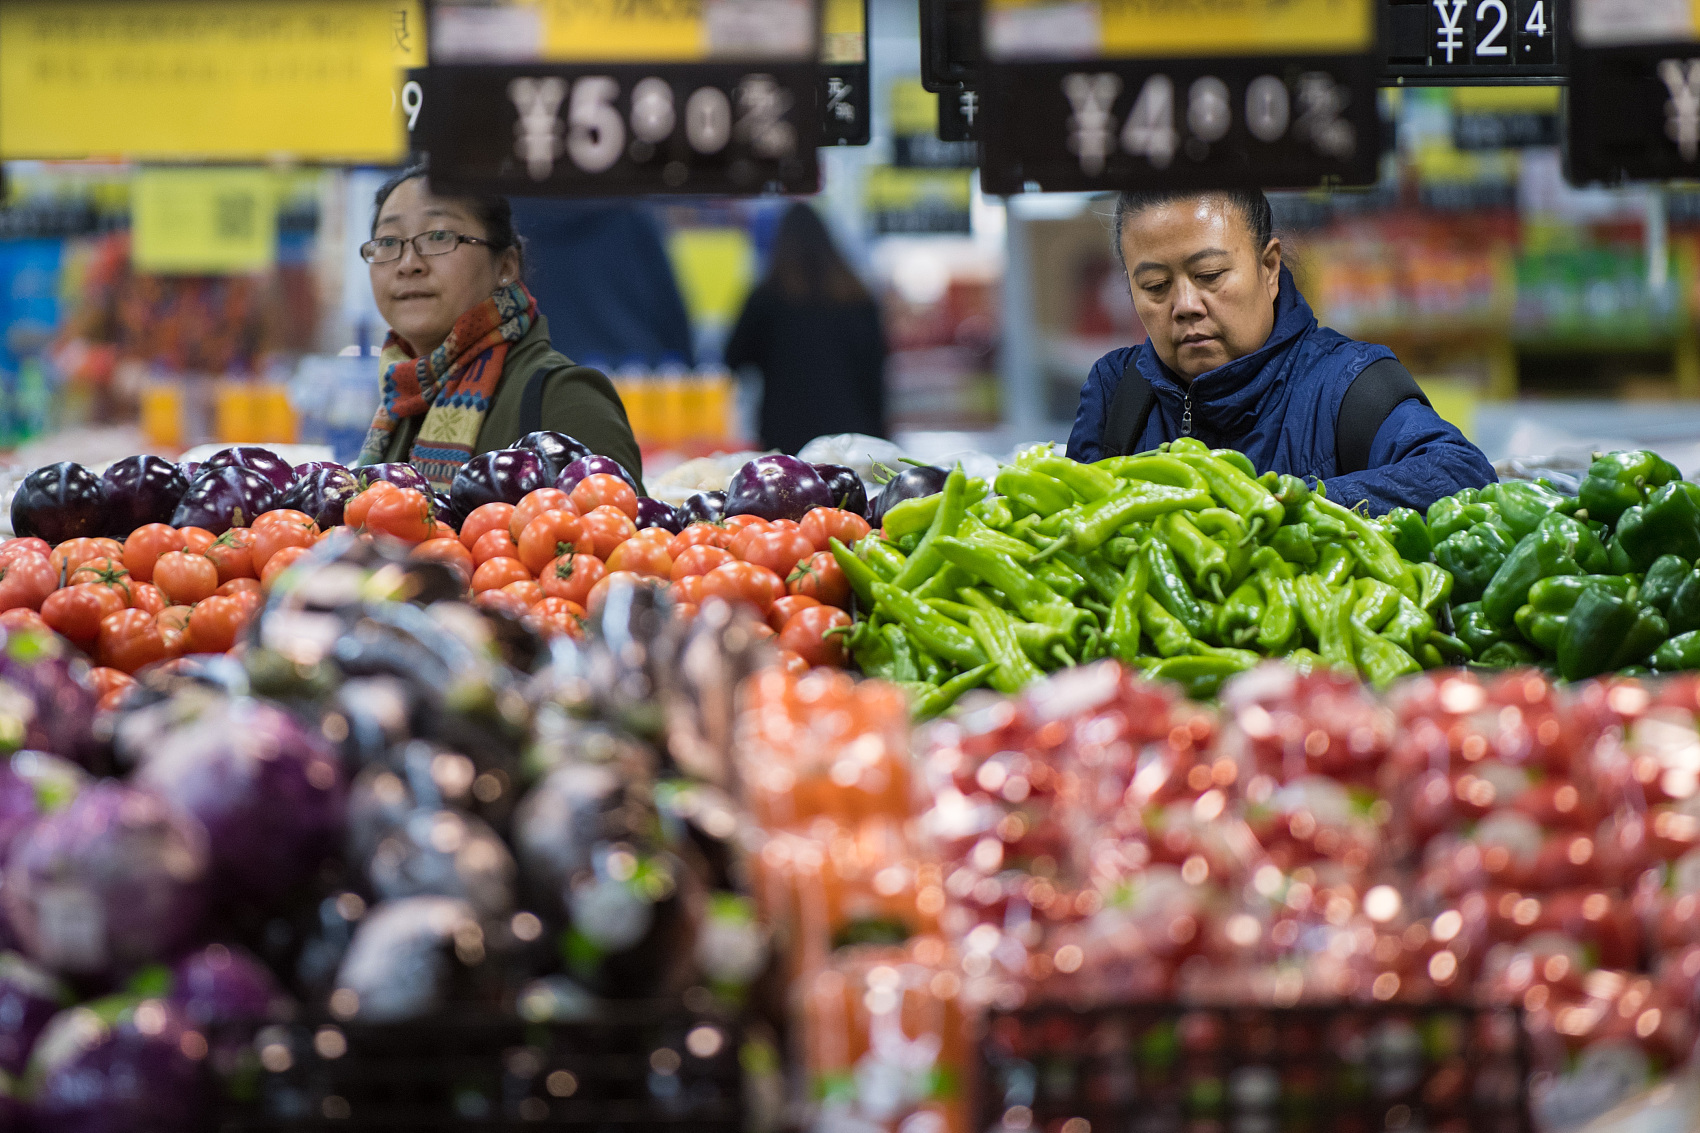 Economic Watch: China's inflation on solid growth as economy stabilizes